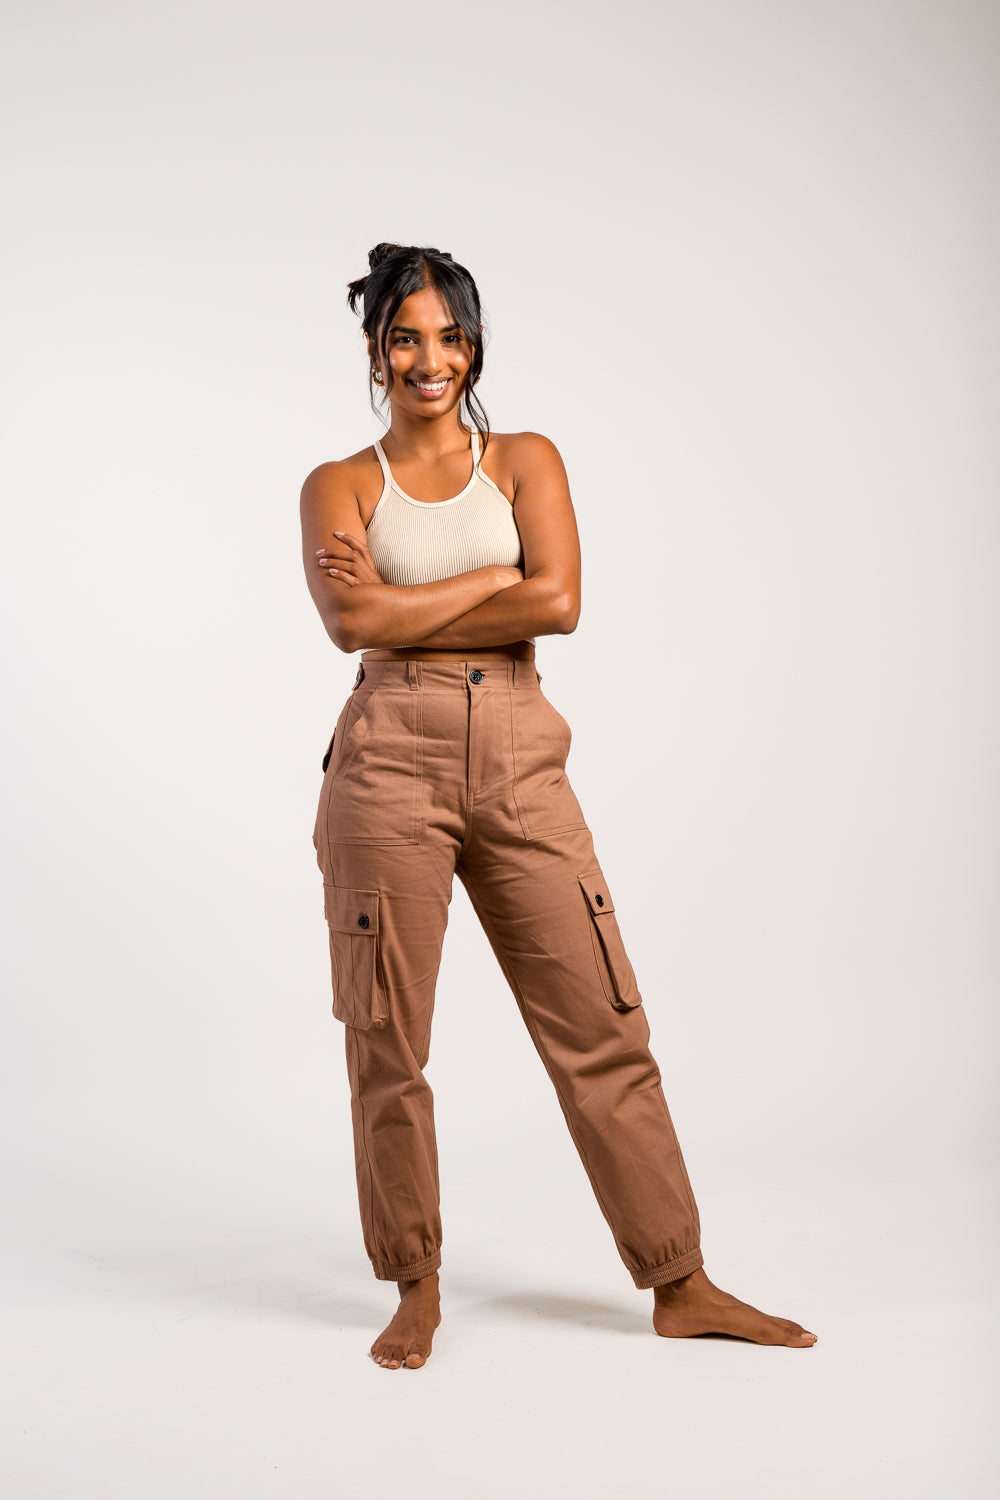 all star  Green cargo pants outfit, Cargo pants women, Womens